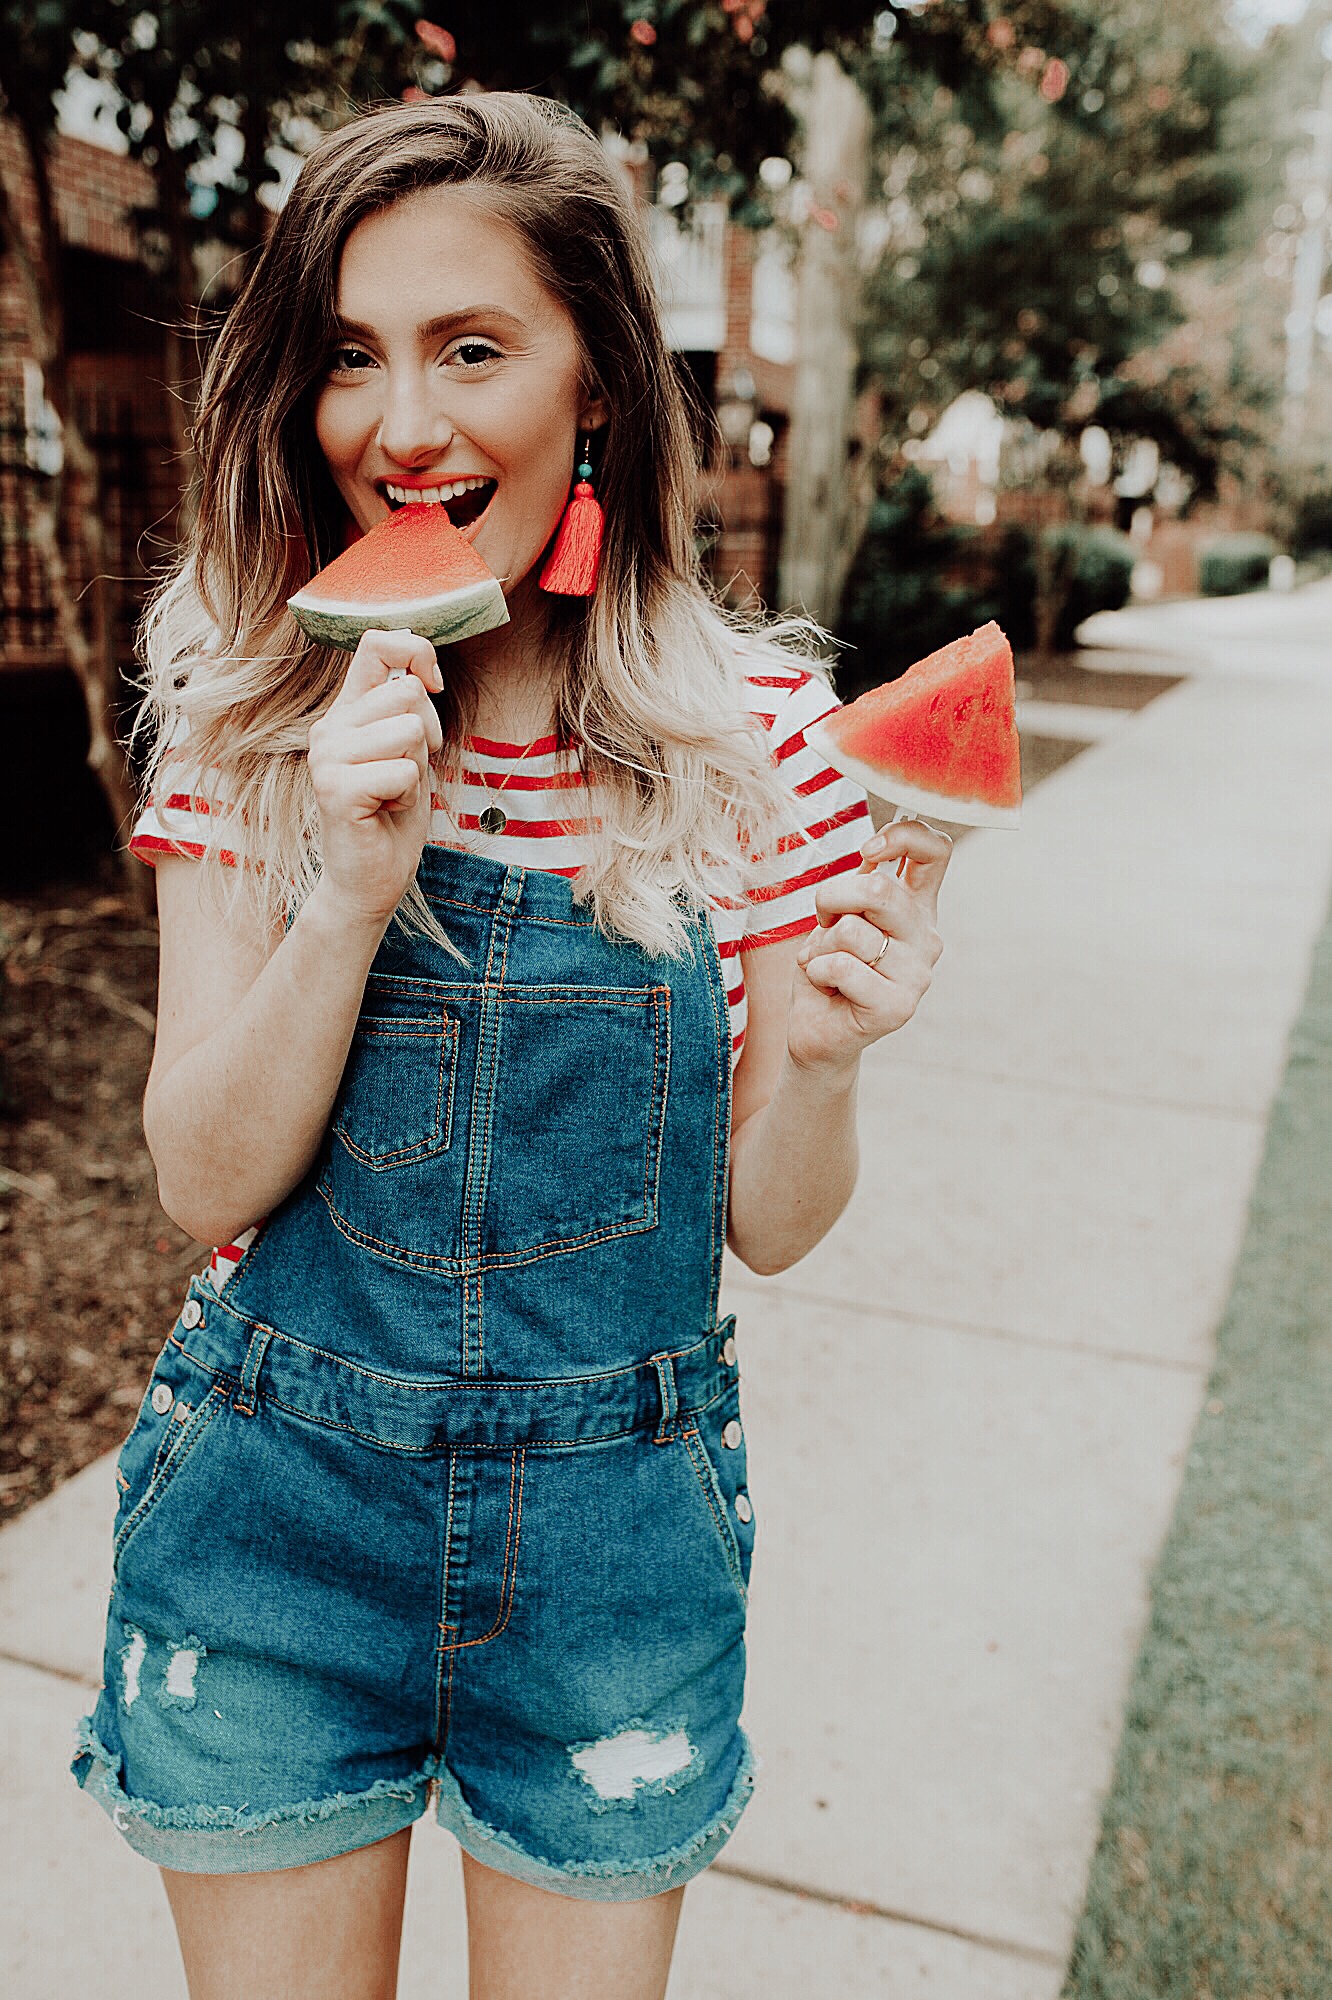 Watermelon recipes in celebration of National Watermelon Day by North Carolina fashion and lifestyle blogger Jessica Linn wearing Forever21 overalls.